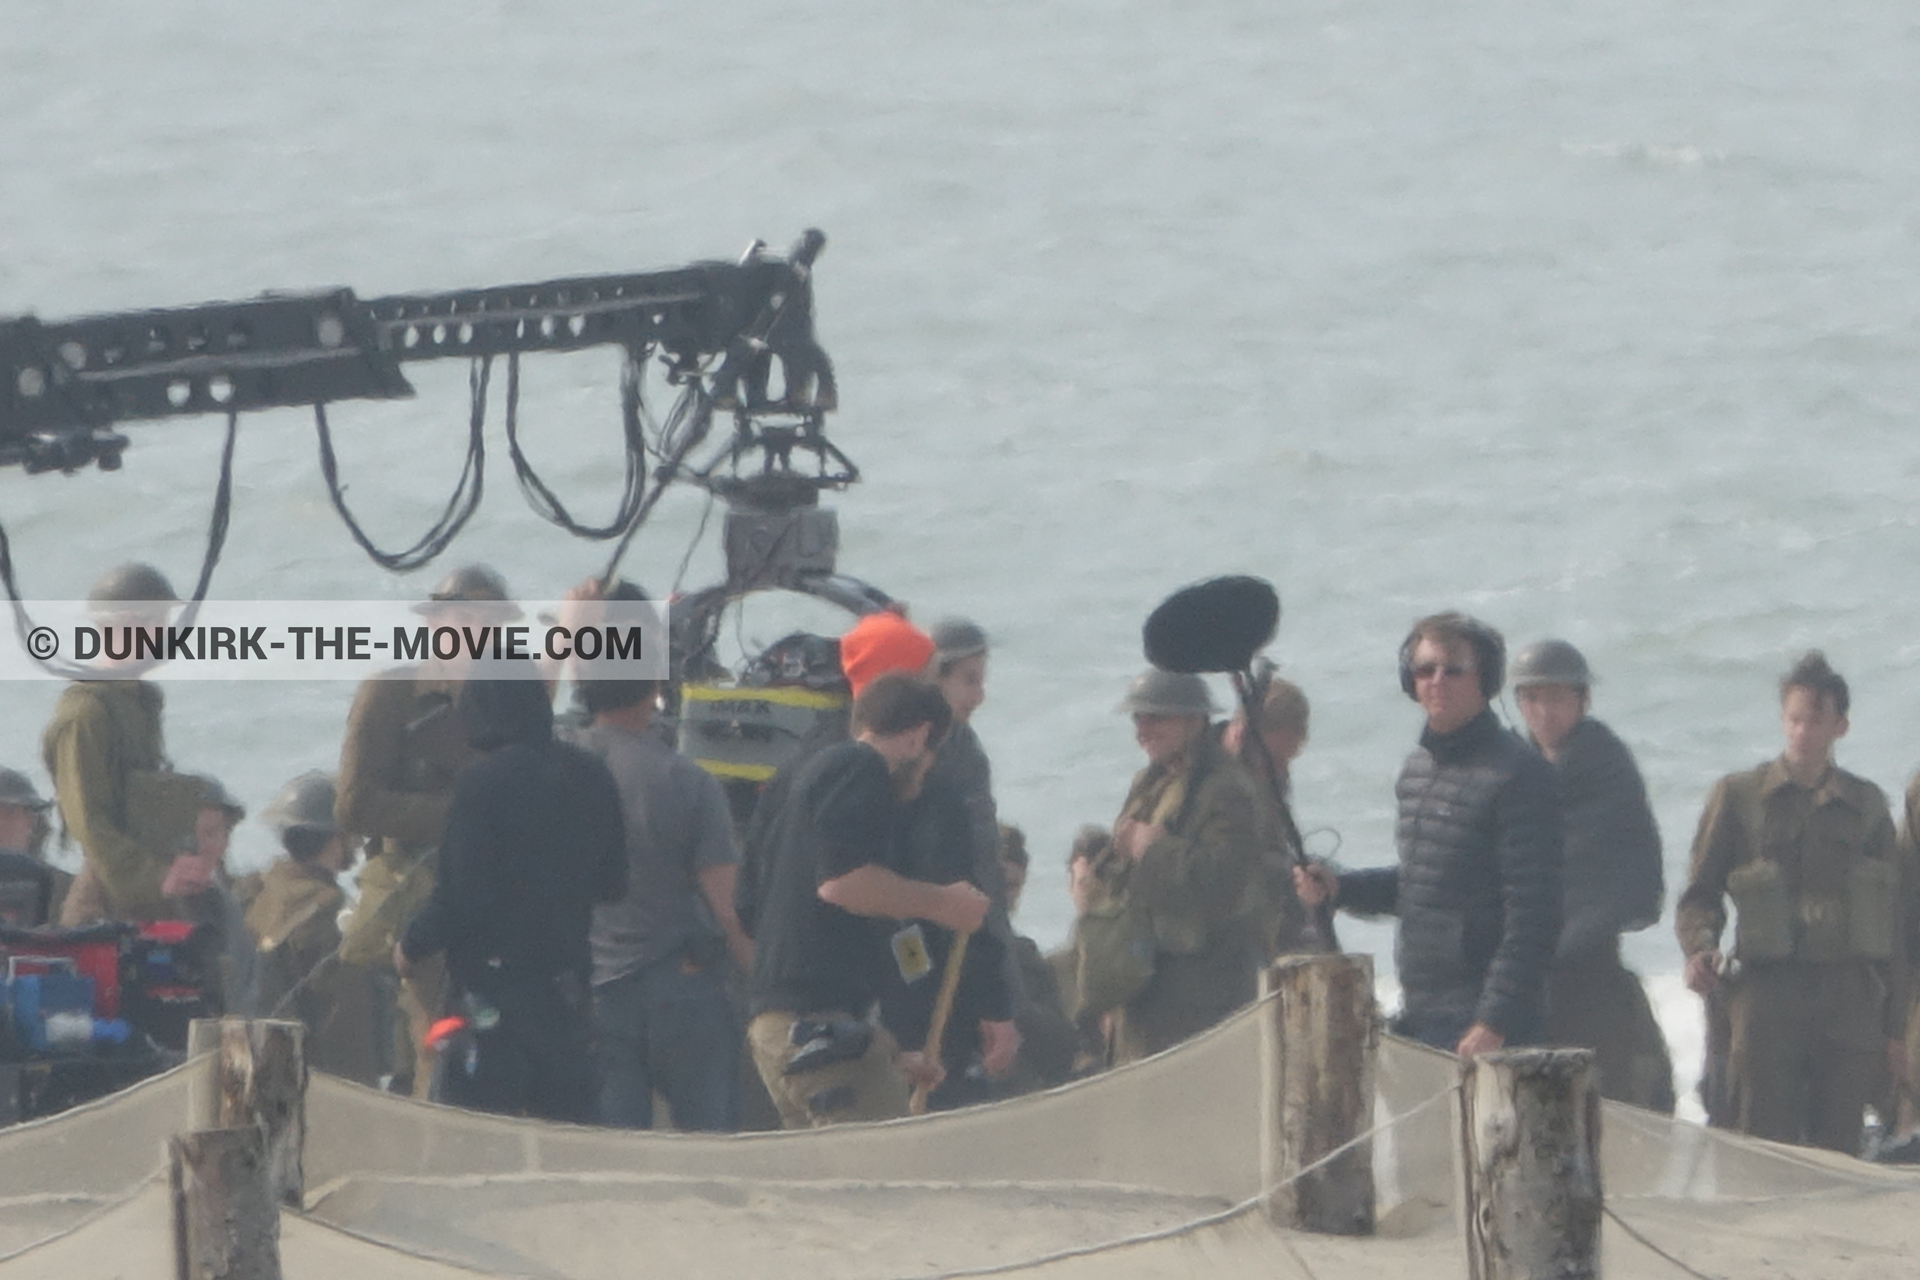 Picture with IMAX camera, supernumeraries, beach, technical team,  from behind the scene of the Dunkirk movie by Nolan